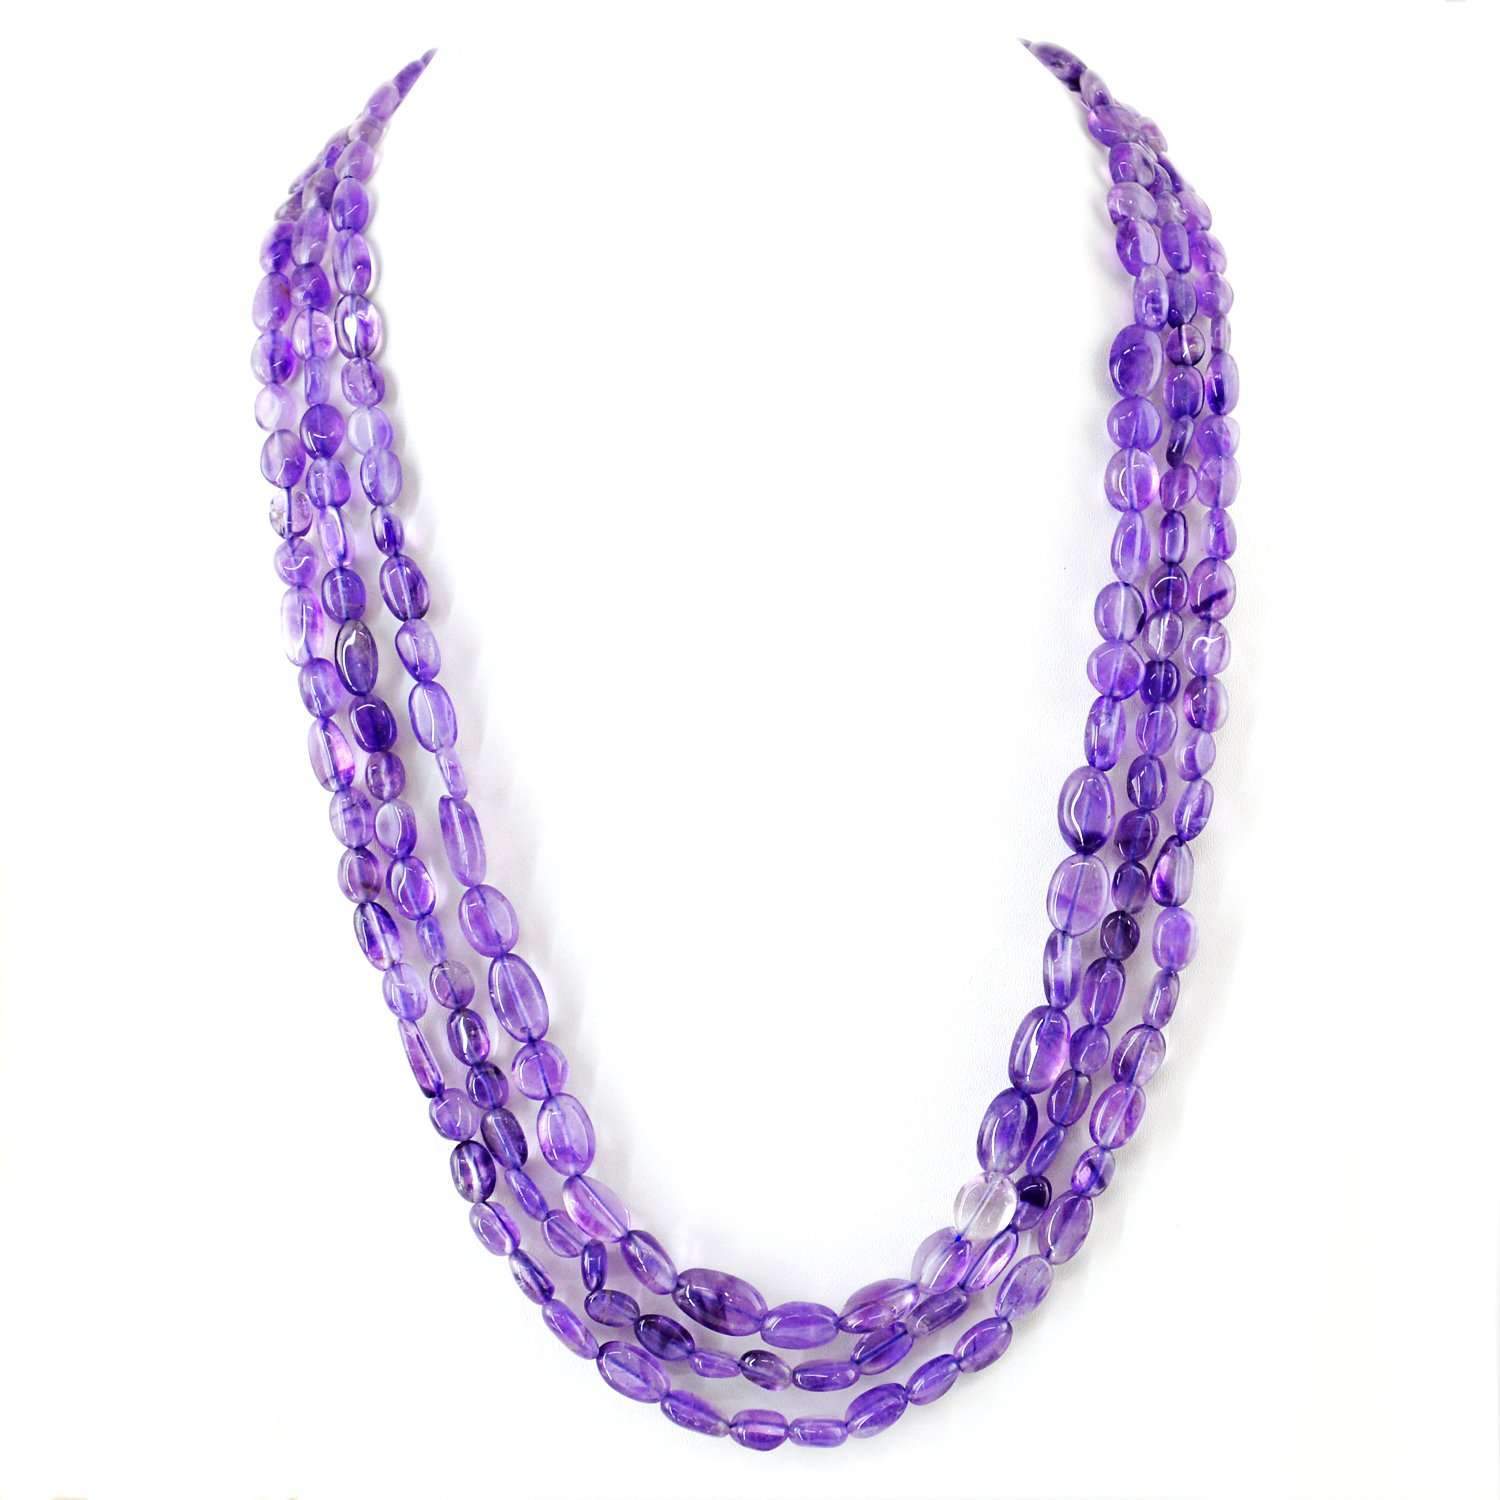 gemsmore:3 Strand Purple Amethyst Necklace Natural Untreated Beads